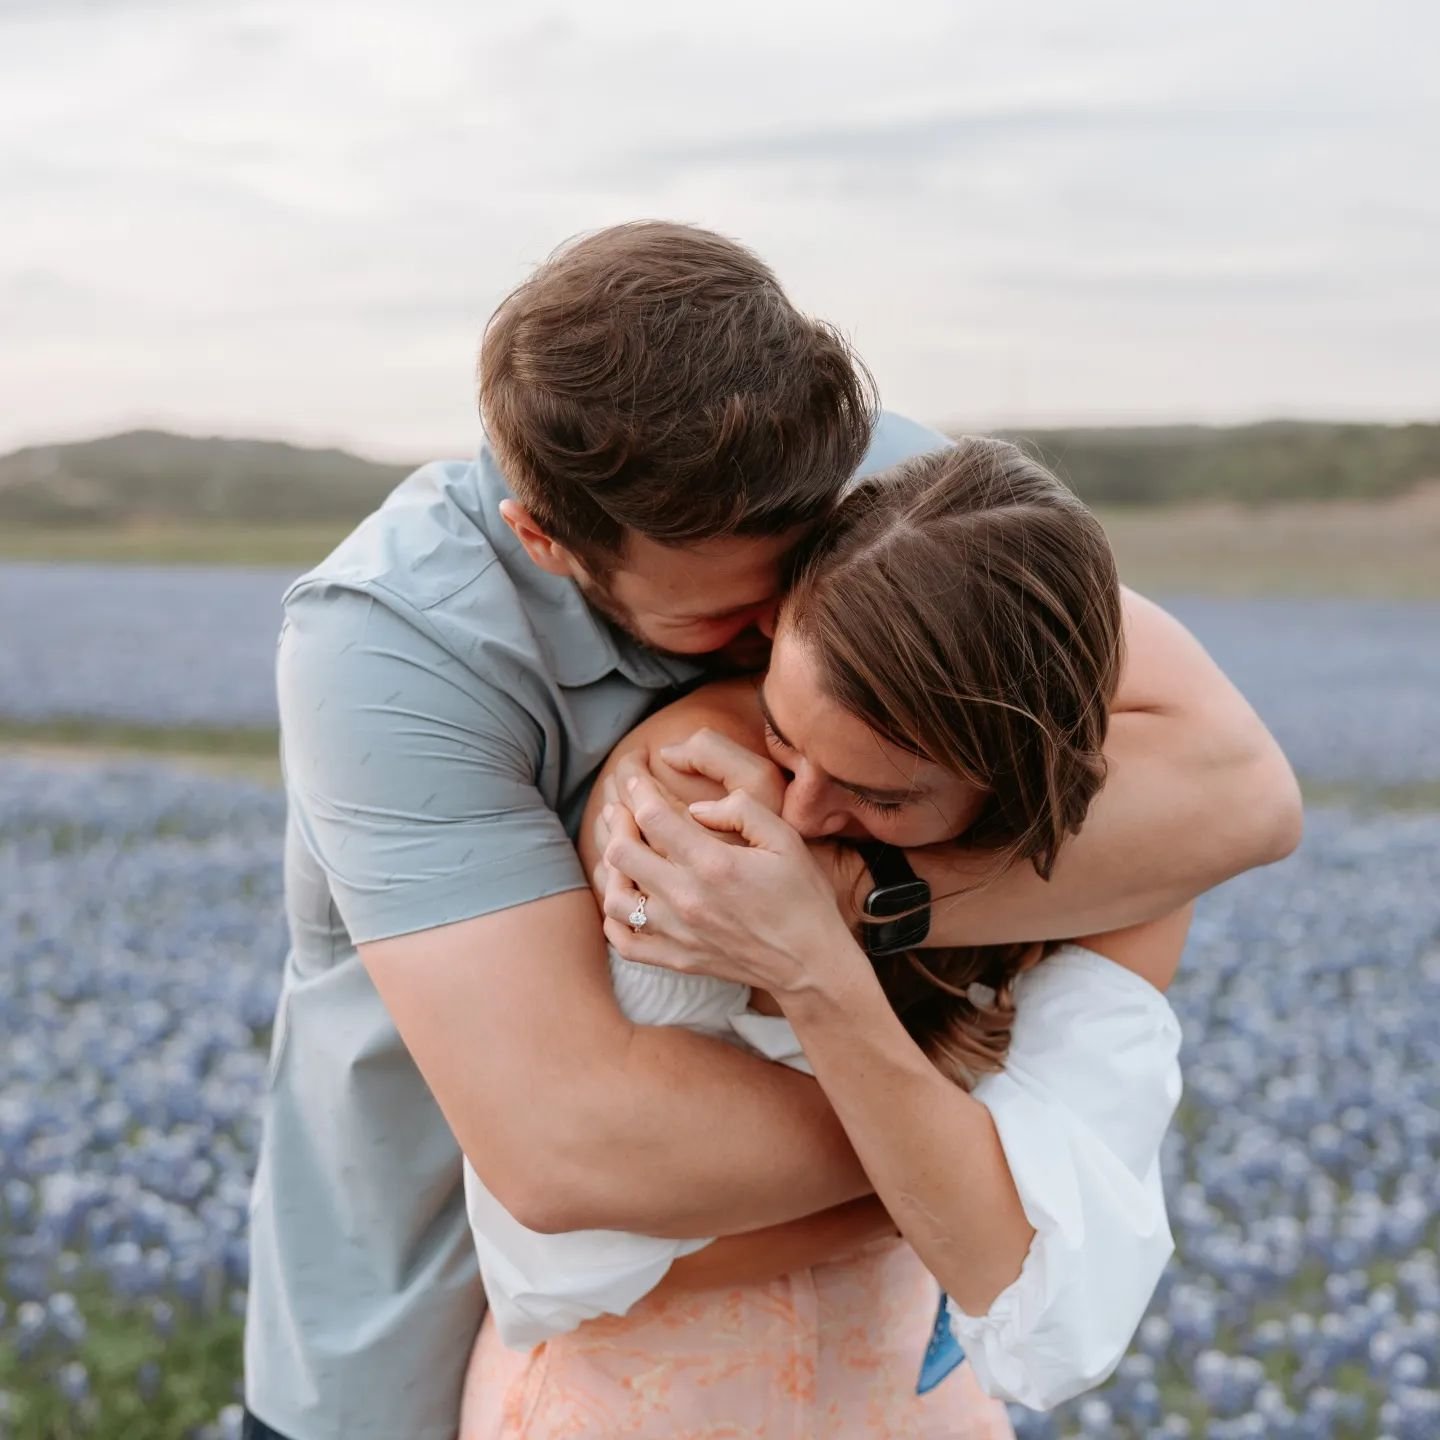 April is blue bonnet season in Texas and if you&rsquo;ve never experienced the endless fields of beautiful blue flowers in person, I highly suggest booking a quick weekend getaway to see this natural wonder! When Ashleen and Sam invited us down to Te